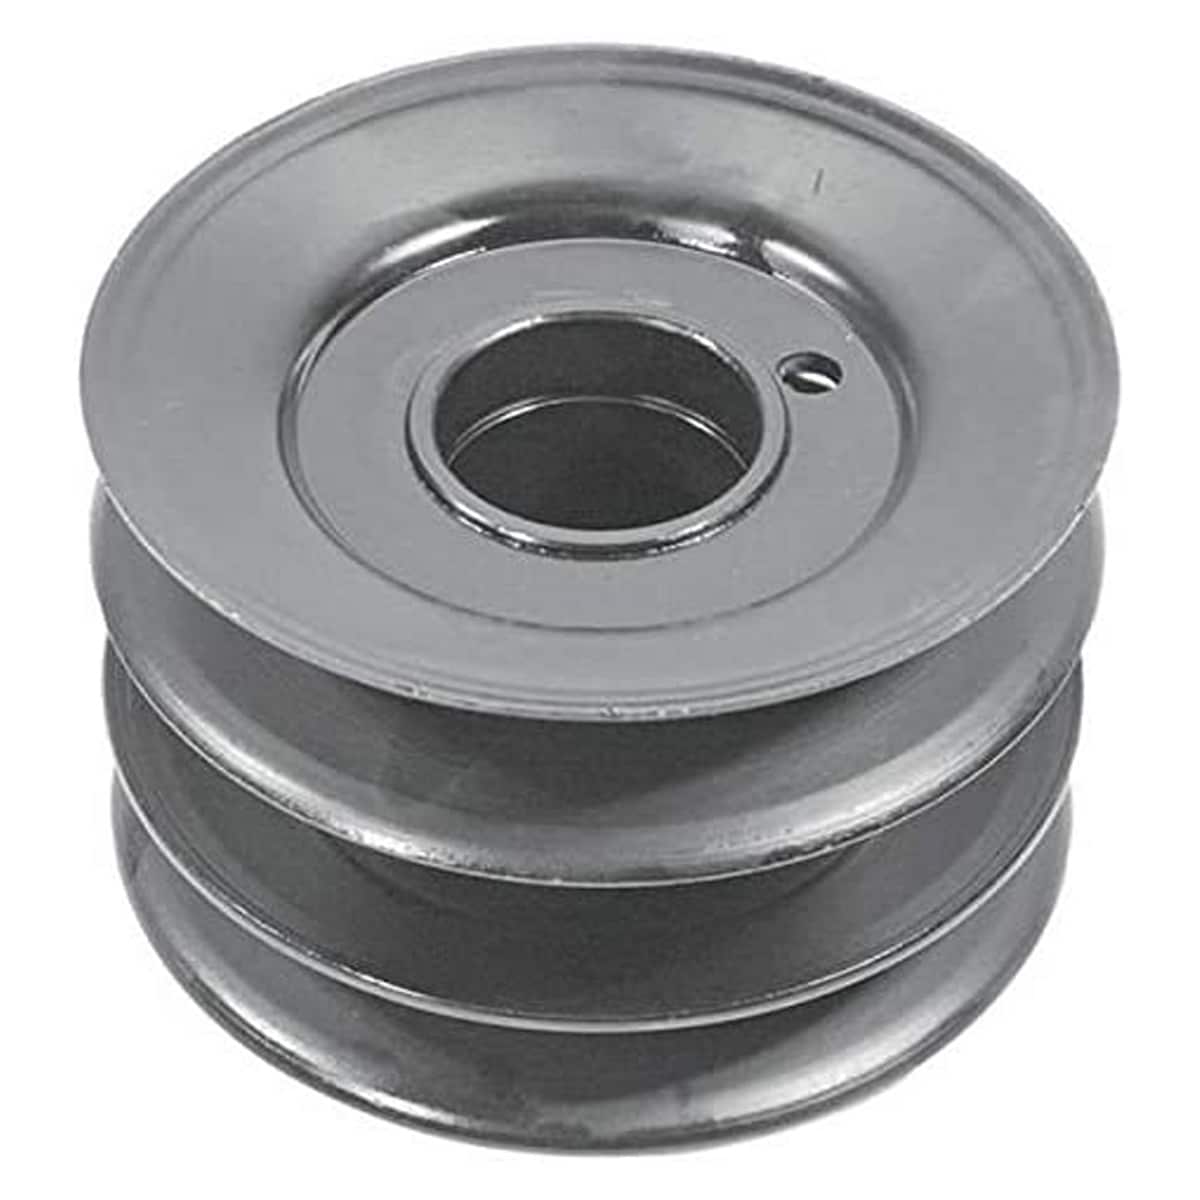 OakTen Spindle for Riding Mower (Fits MTD Yard Machine, 690-699 ...